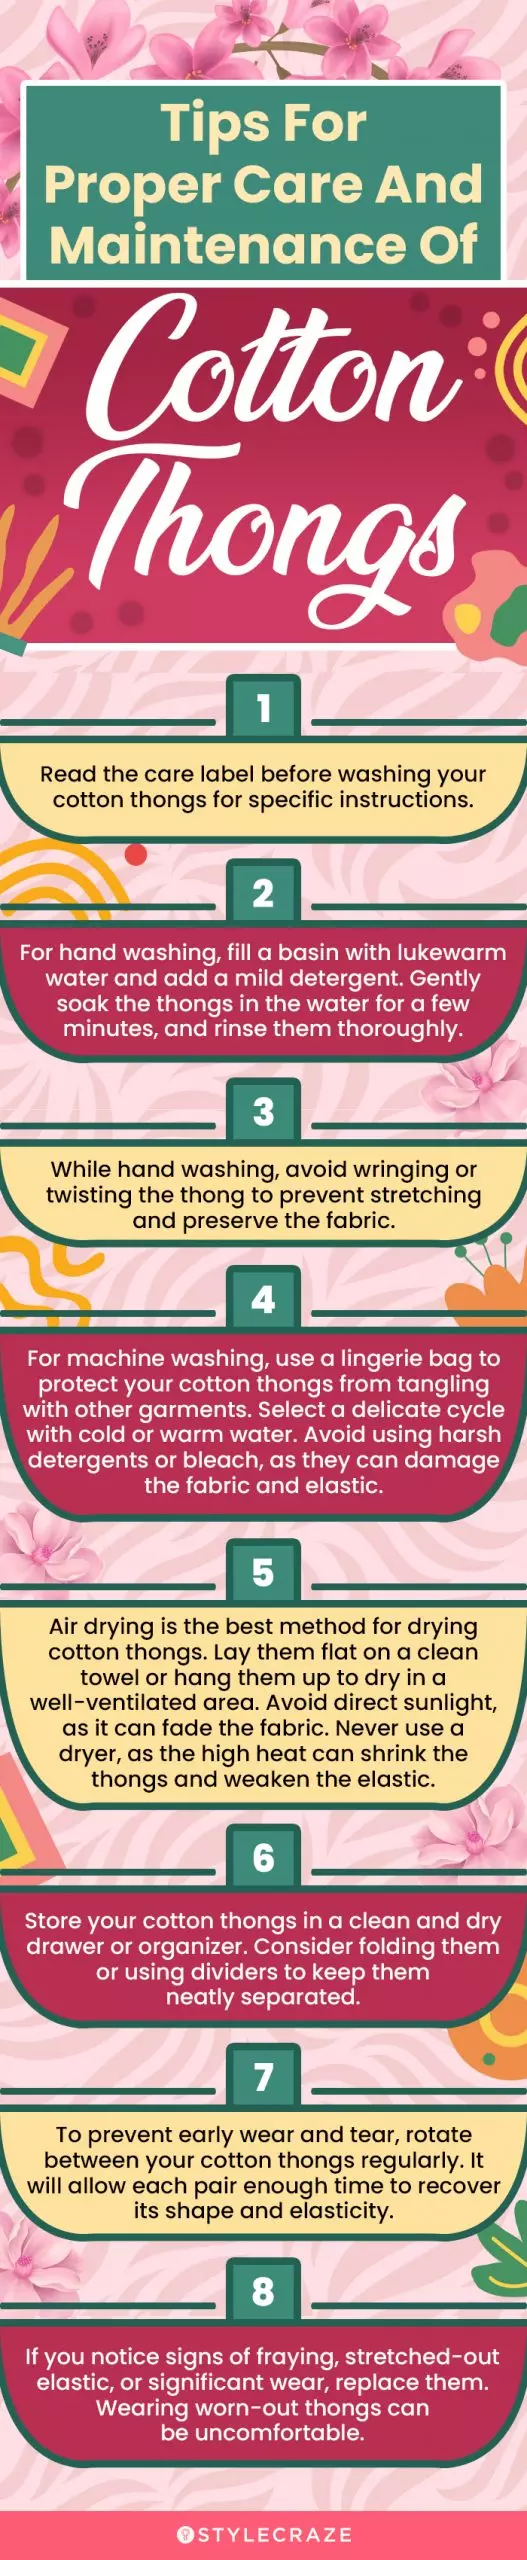 Tips For Proper Care And Maintenance Of Cotton Thongs (infographic)